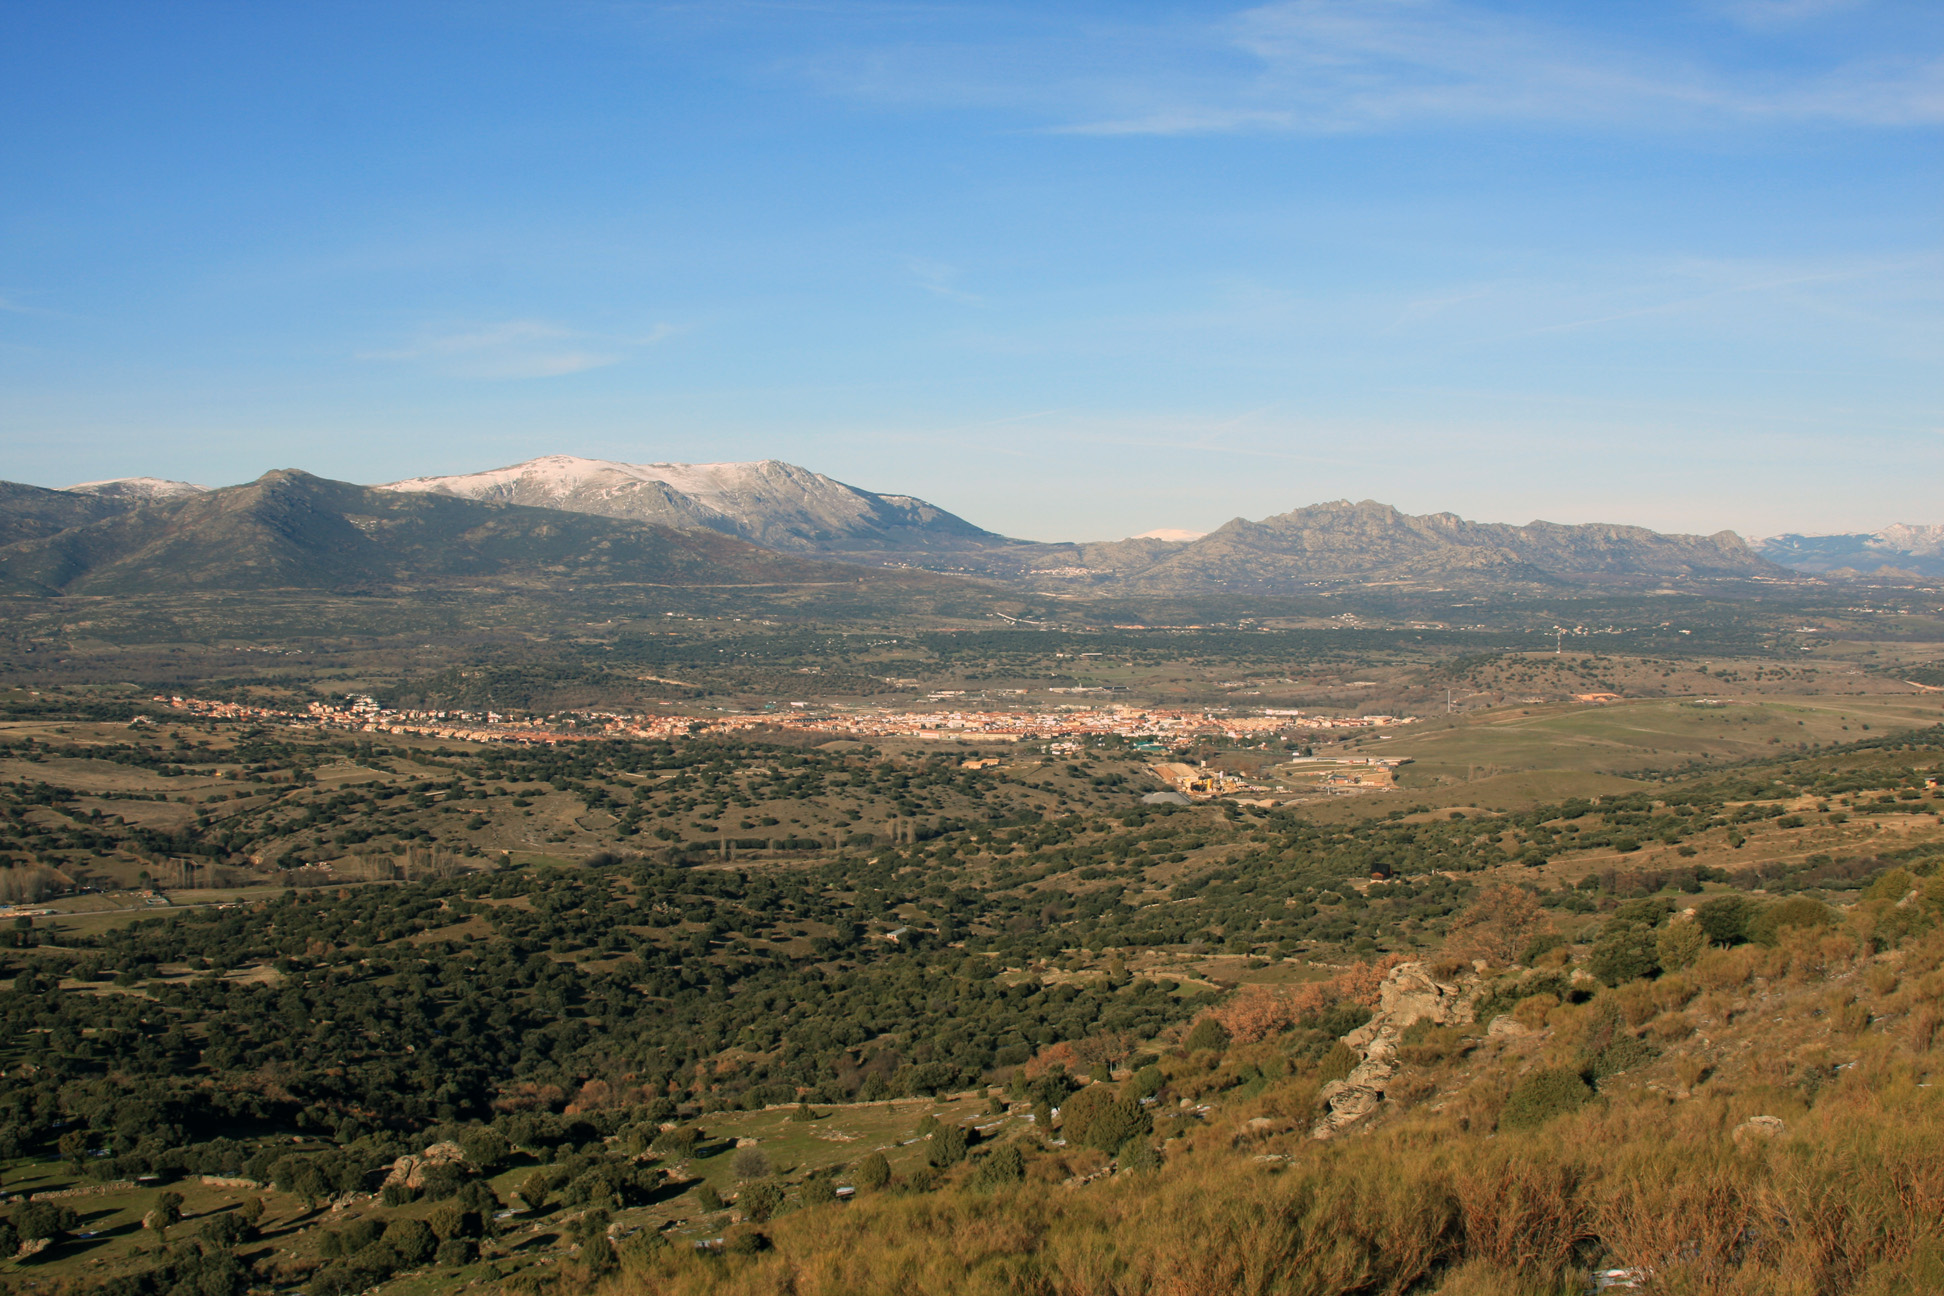 View over a sunny valley, with a town and mountains in the distance